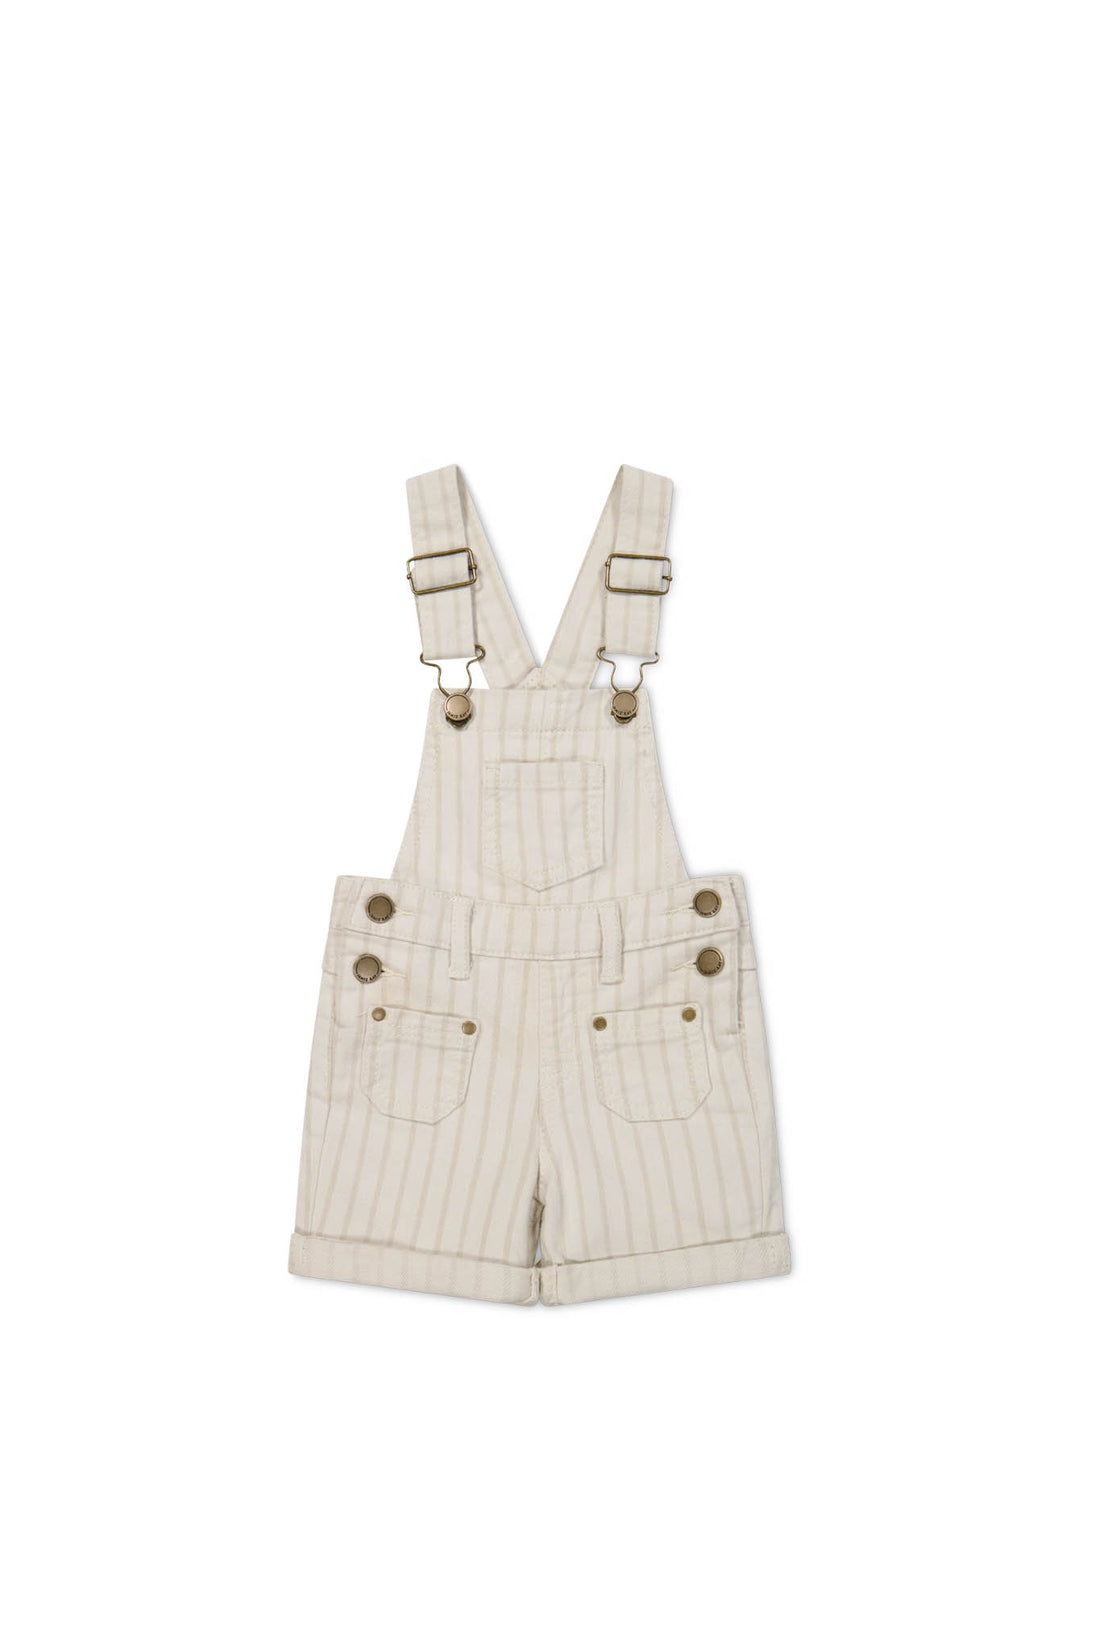 Casey Short Overall - Cassava/Soft Clay Childrens Overall from Jamie Kay NZ